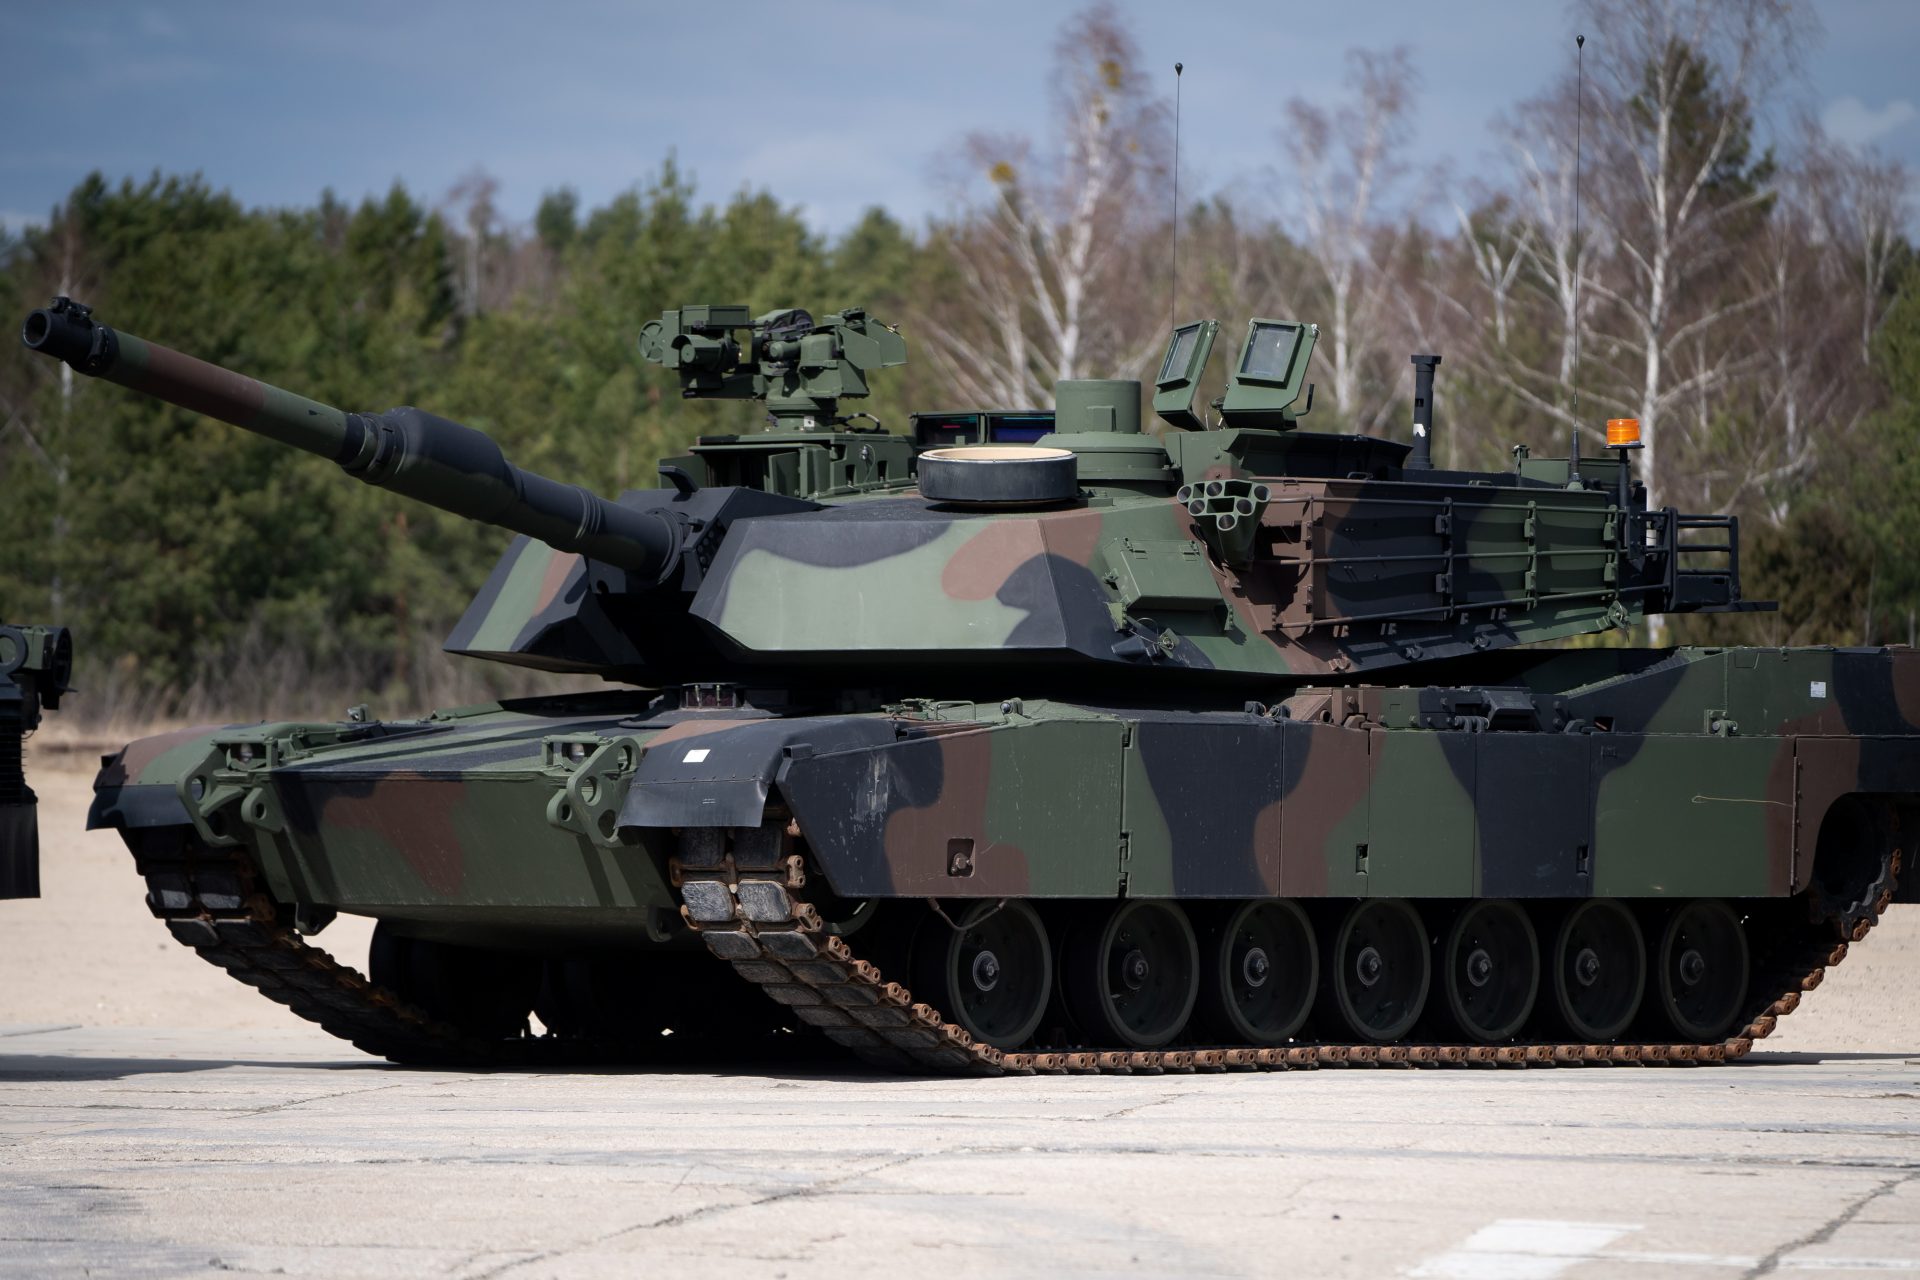 Recent reports suggest the Abrams was sent to war 